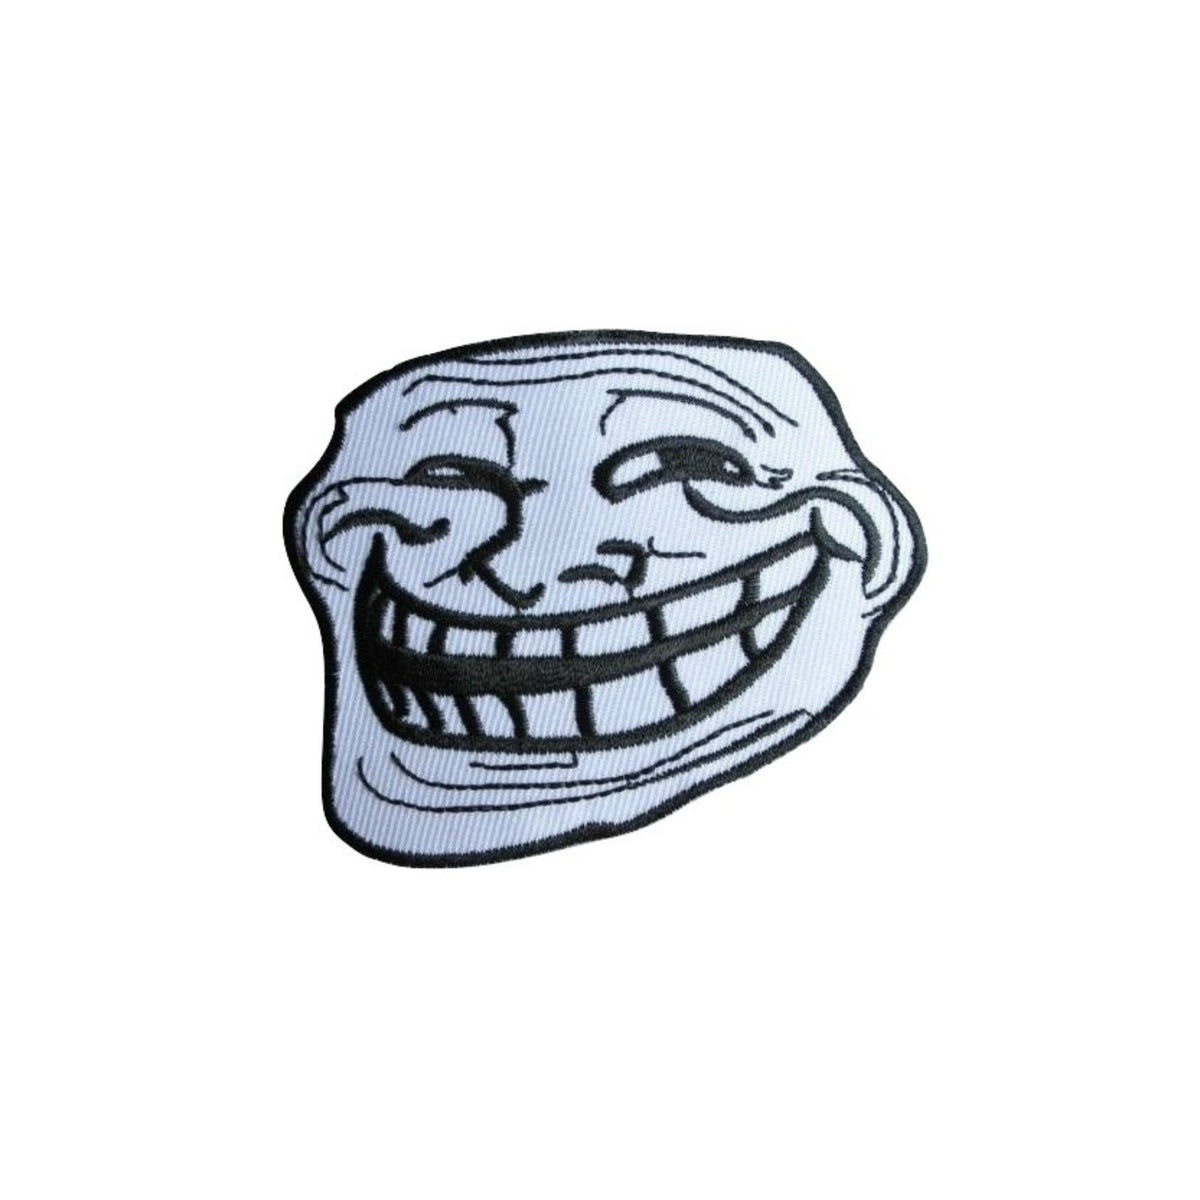 Trollface Meme Iron On Patch Troll Face Gift Clothing Transfer Applique ...